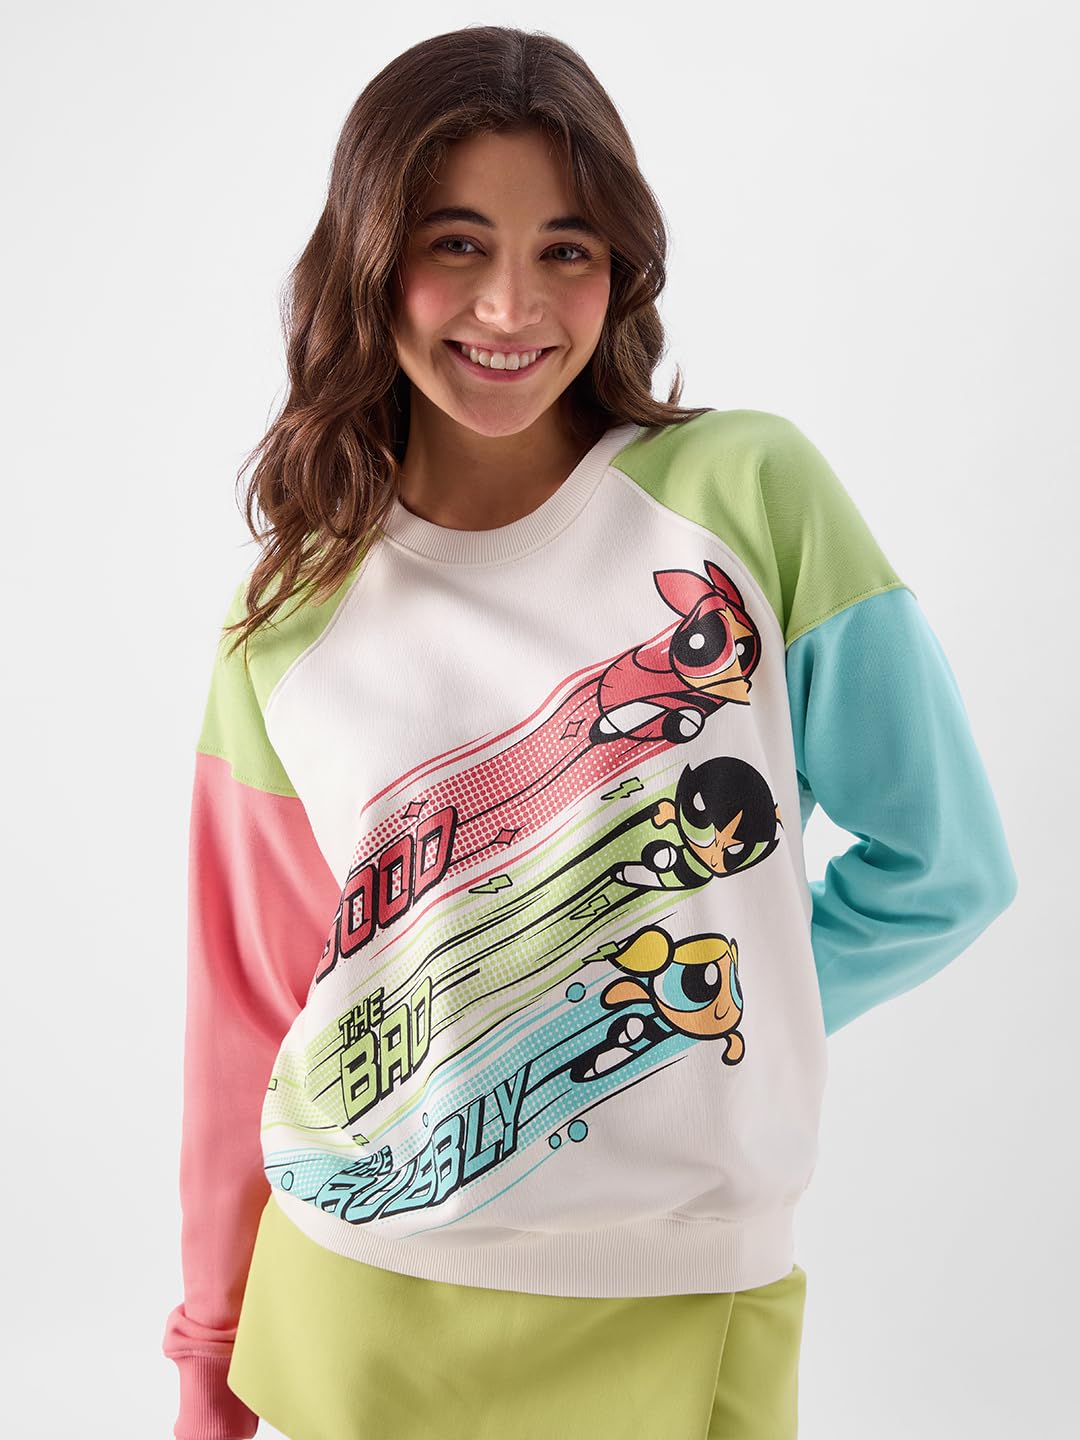 The Souled Store Official Powerpuff Girls: Good, Bad & Bubbly Women Oversized Sweatshirts Sweatshirts Hoodies Pullovers Crewneck Hooded Zip-Up Graphic Printed Solid Color Block Sportswear Casual